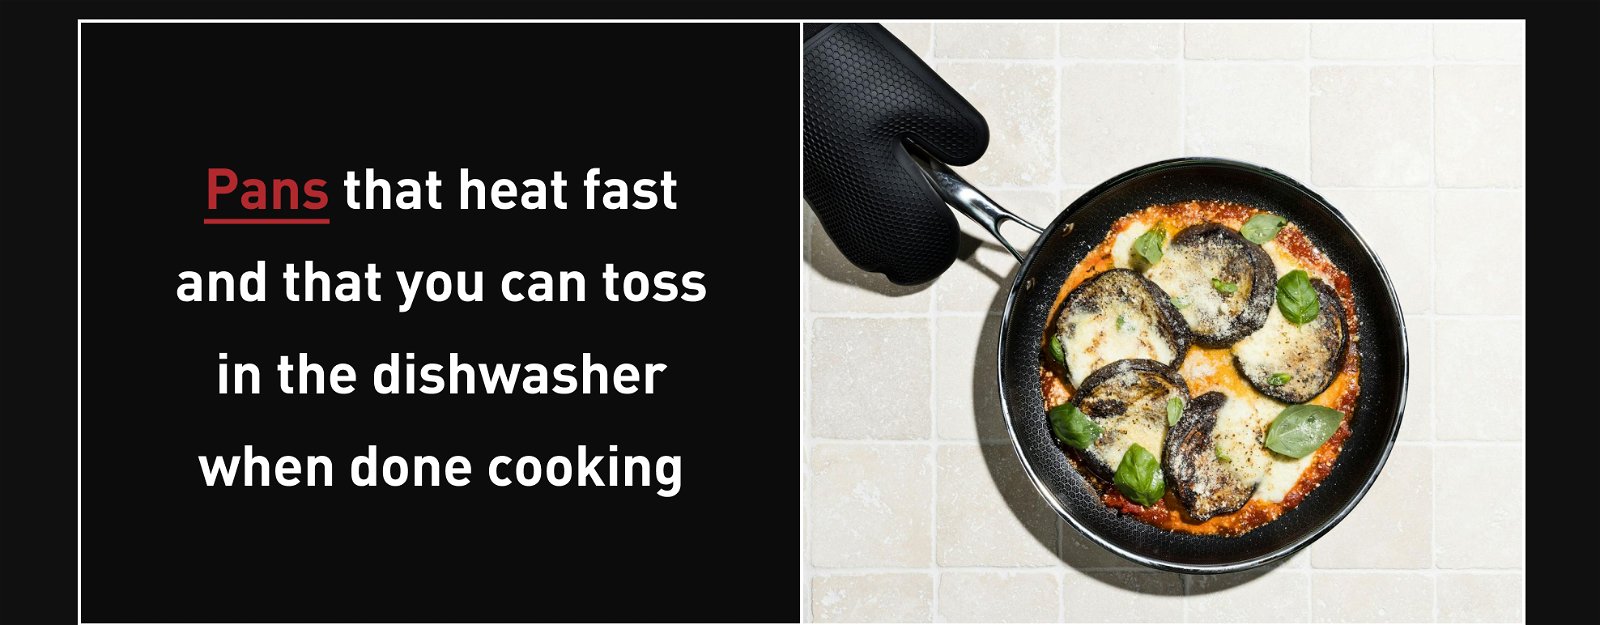 Pans that heat fast and that you can toss in the dishwasher when done cooking